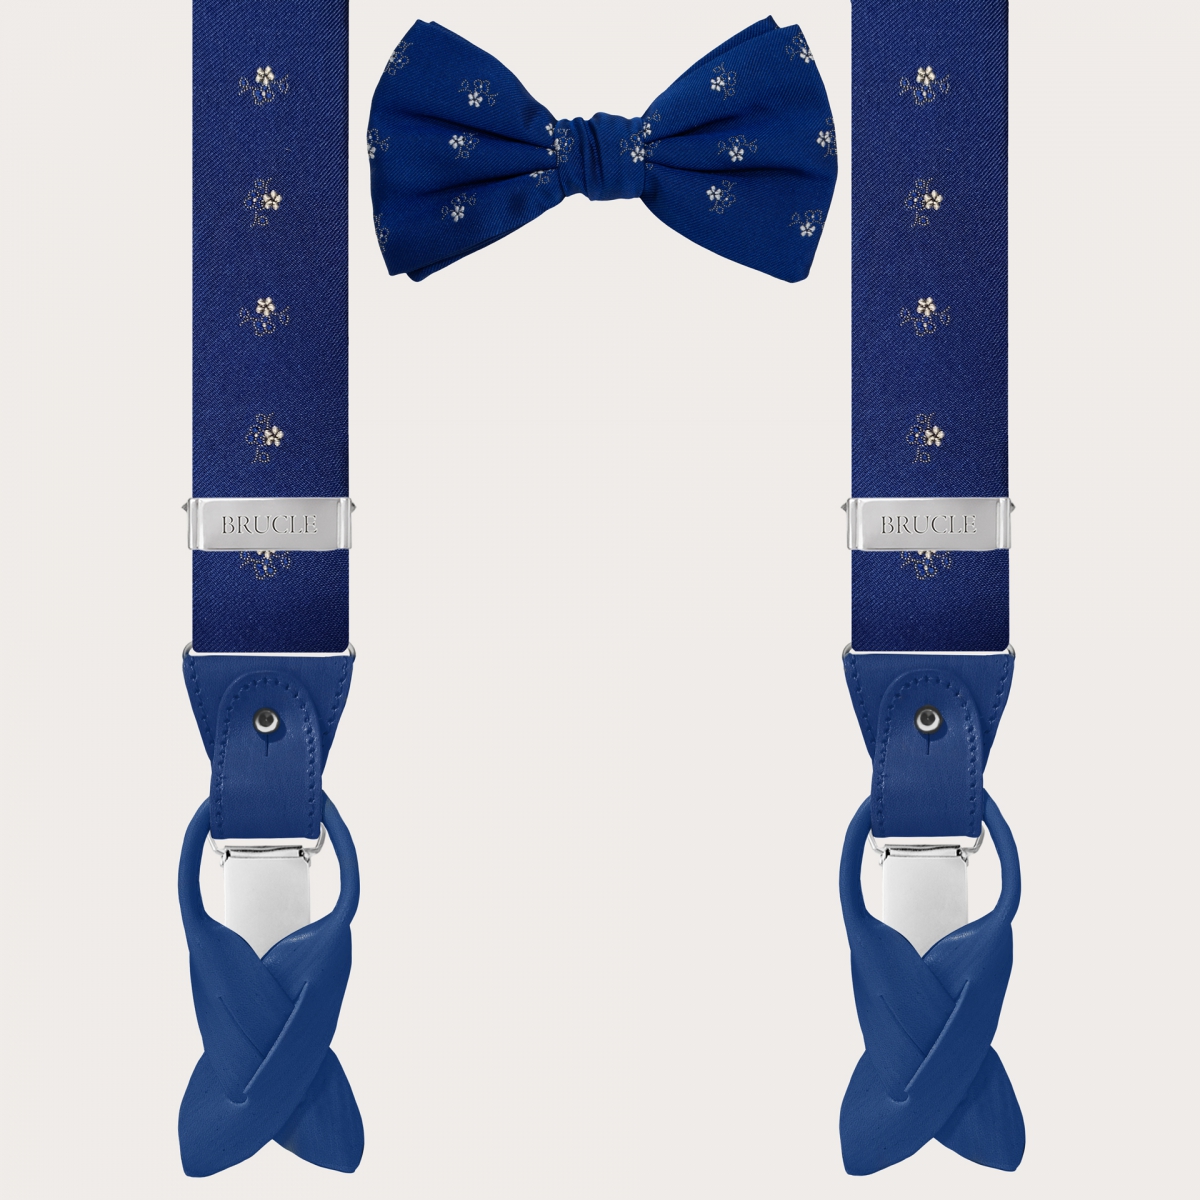 BRUCLE Royal blue silk suspenders and bow tie set